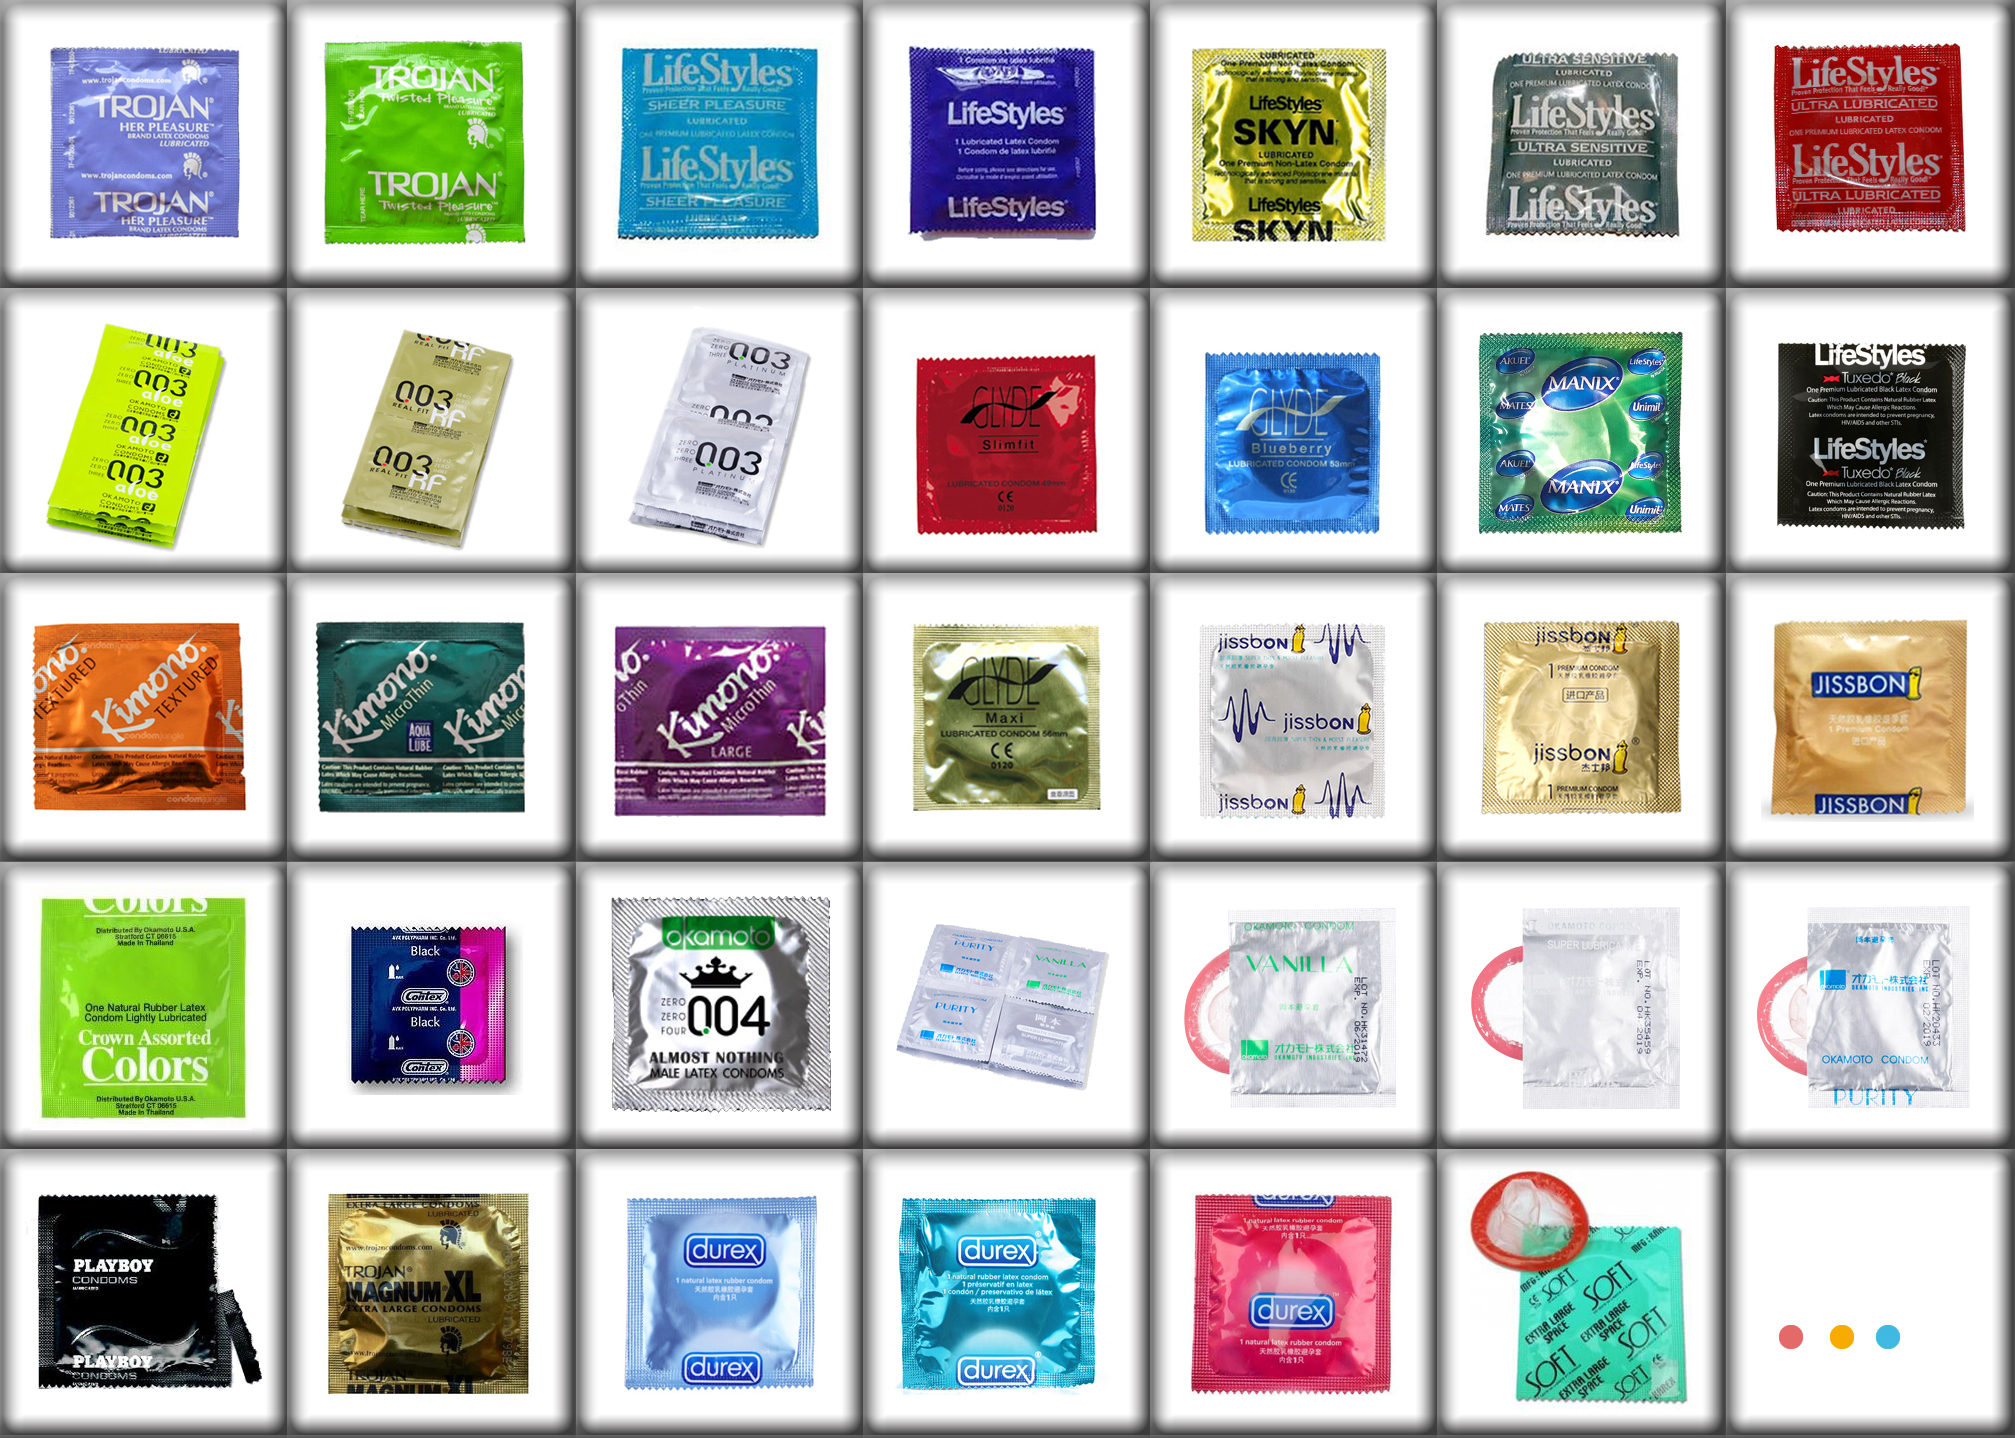 New condom brand offers 95 different sizes